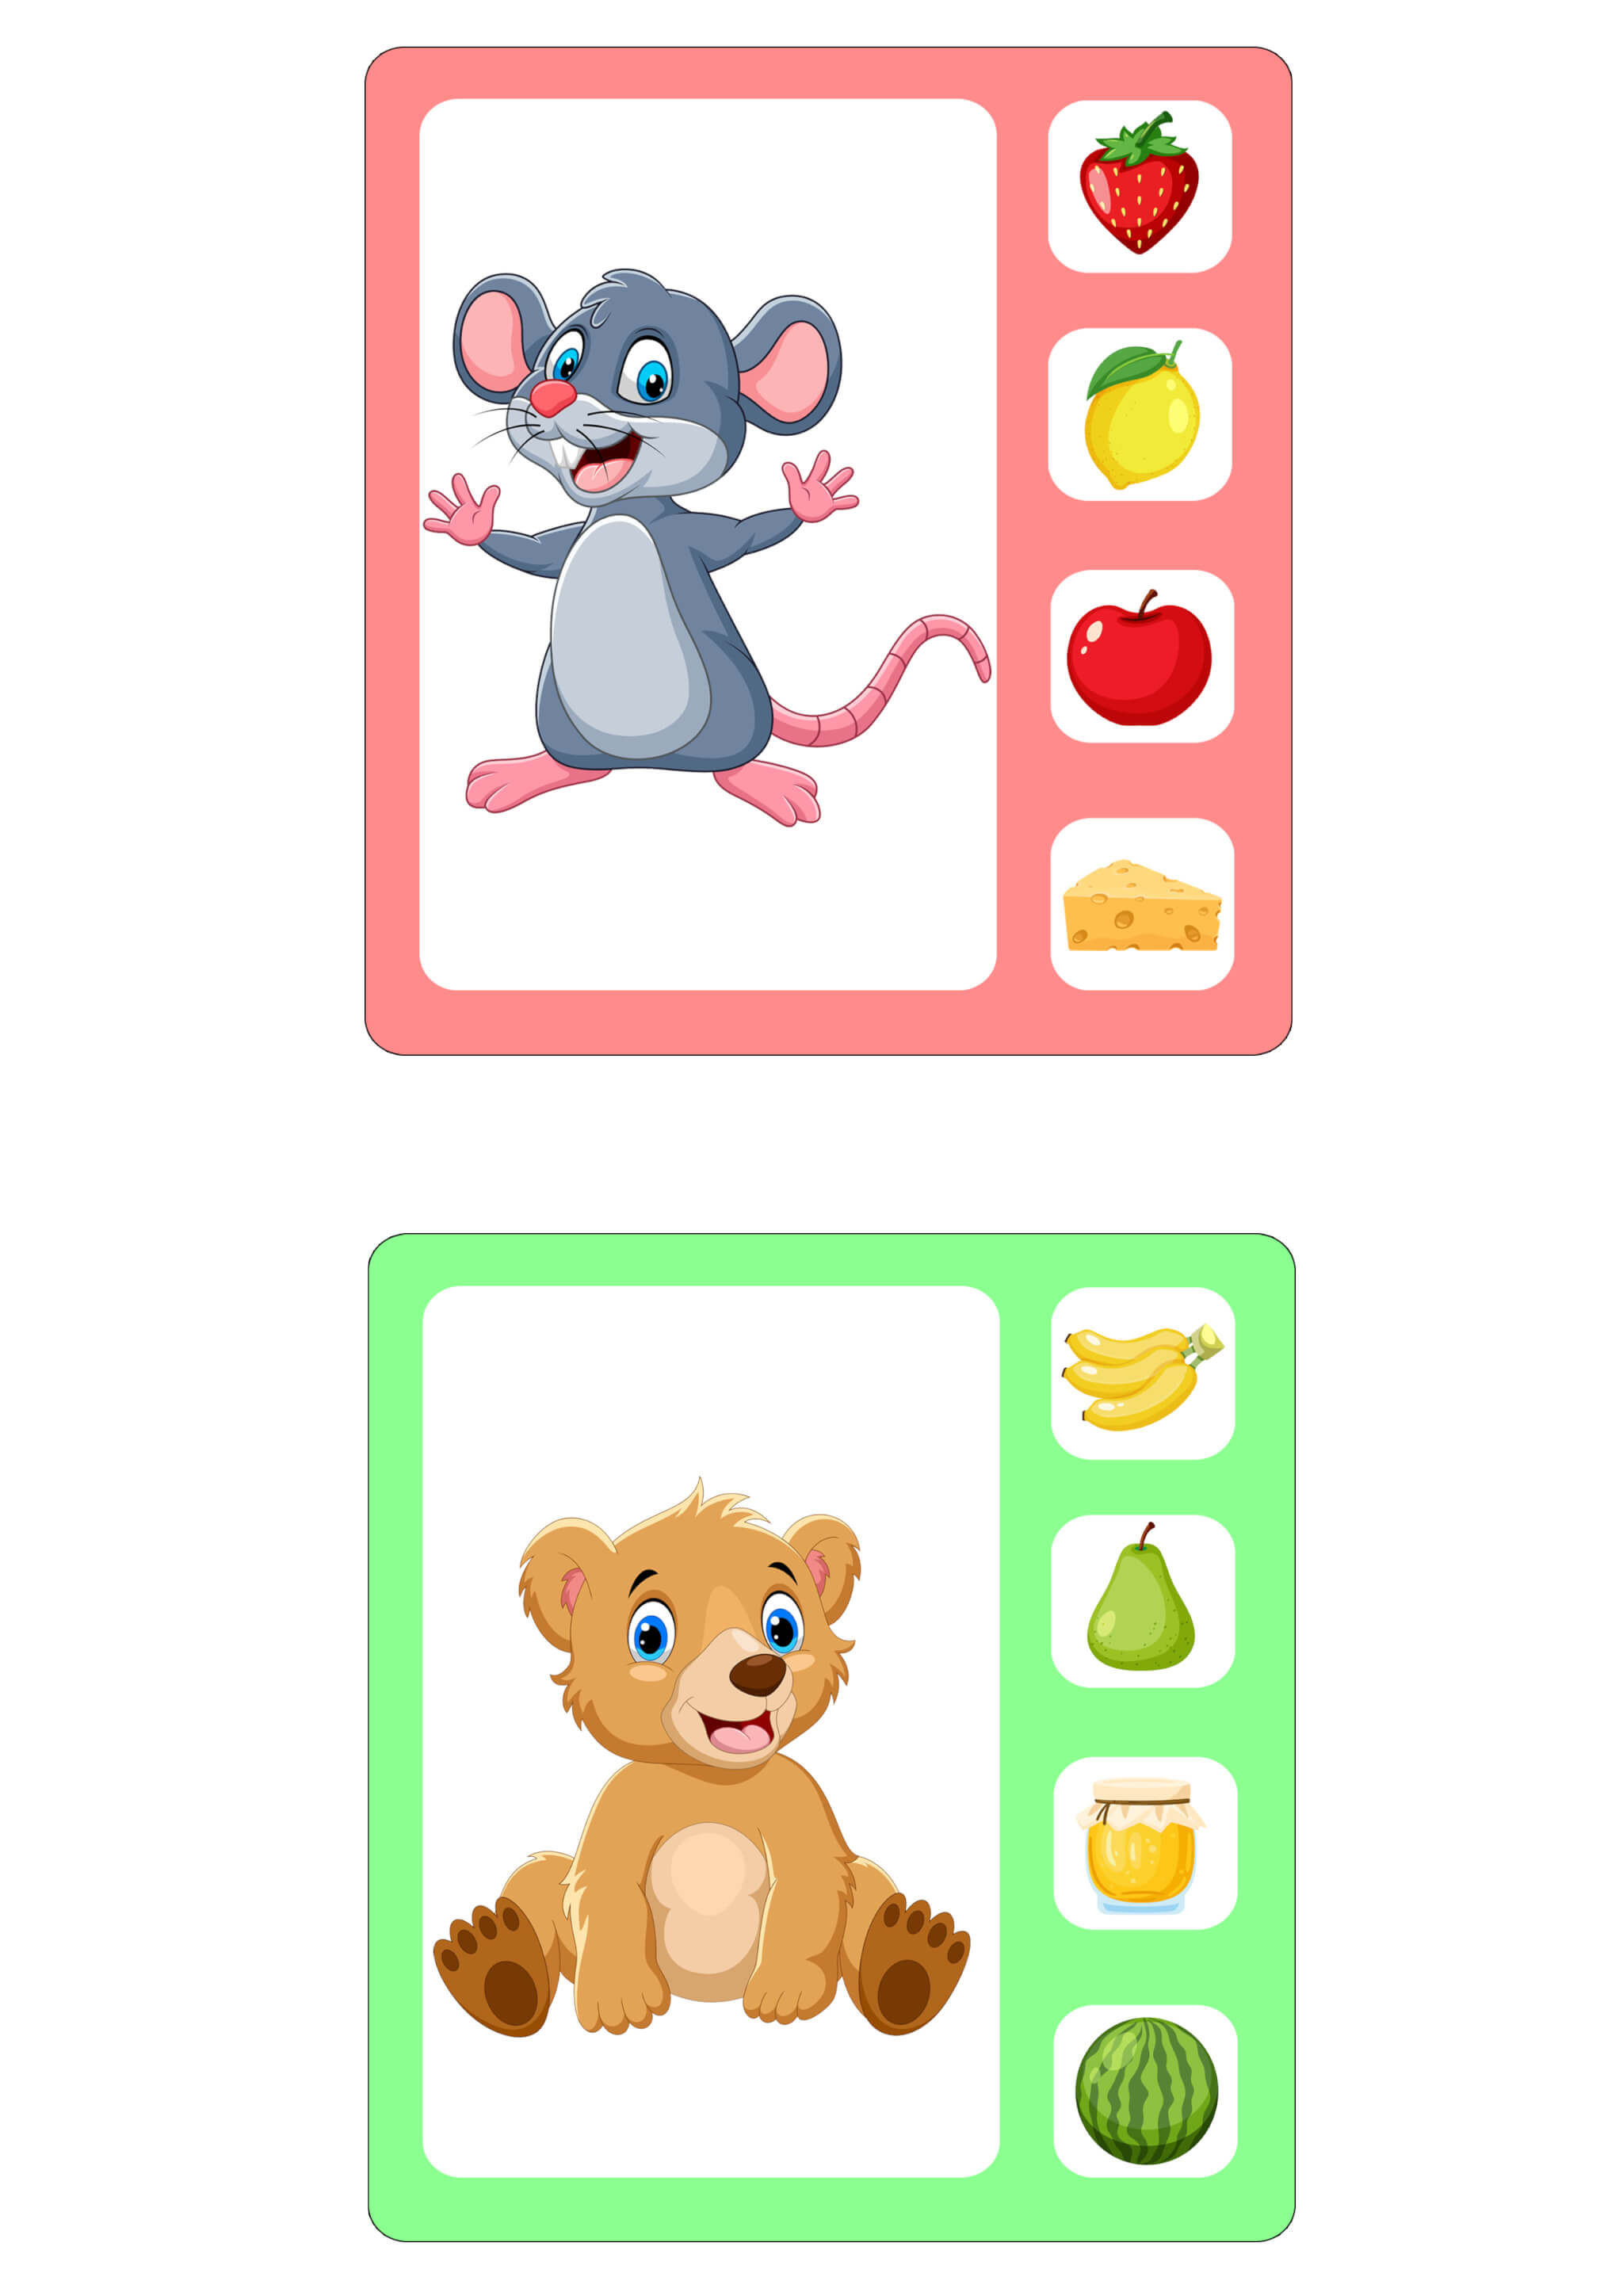 Worksheet Animals and Their Food - Image 2